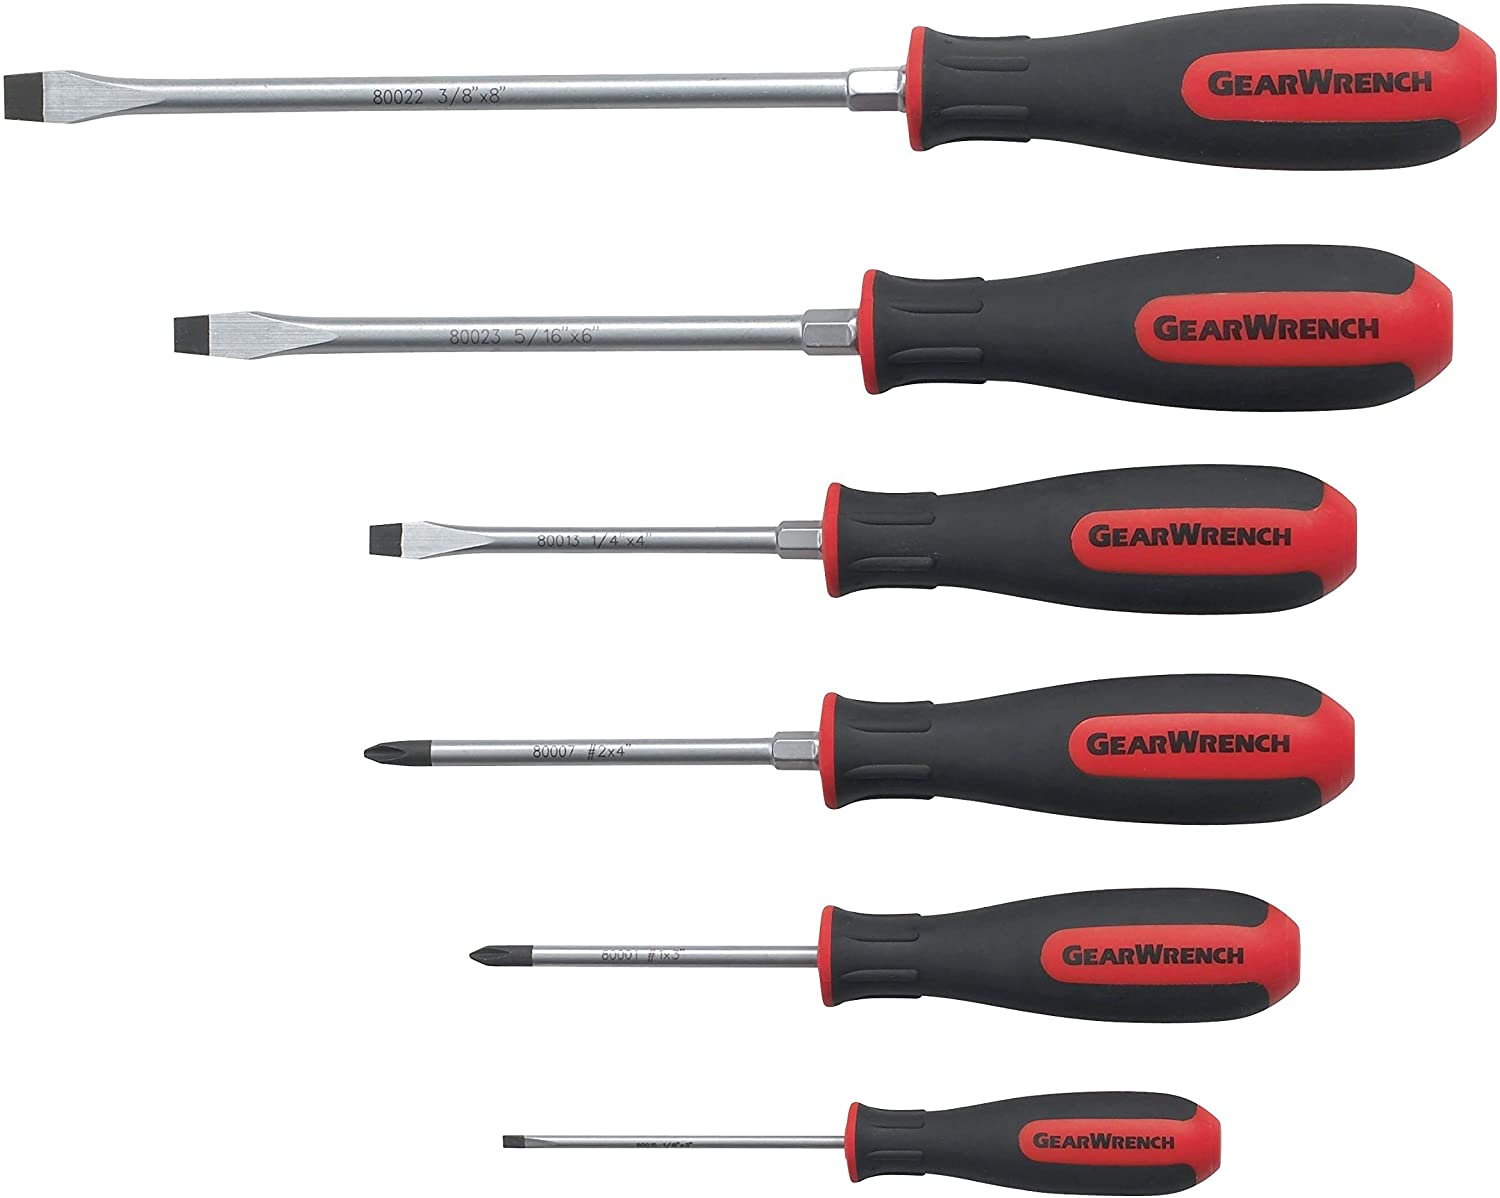 GEARWRENCH 6Pc Comb Dual Material Screwdriver Set